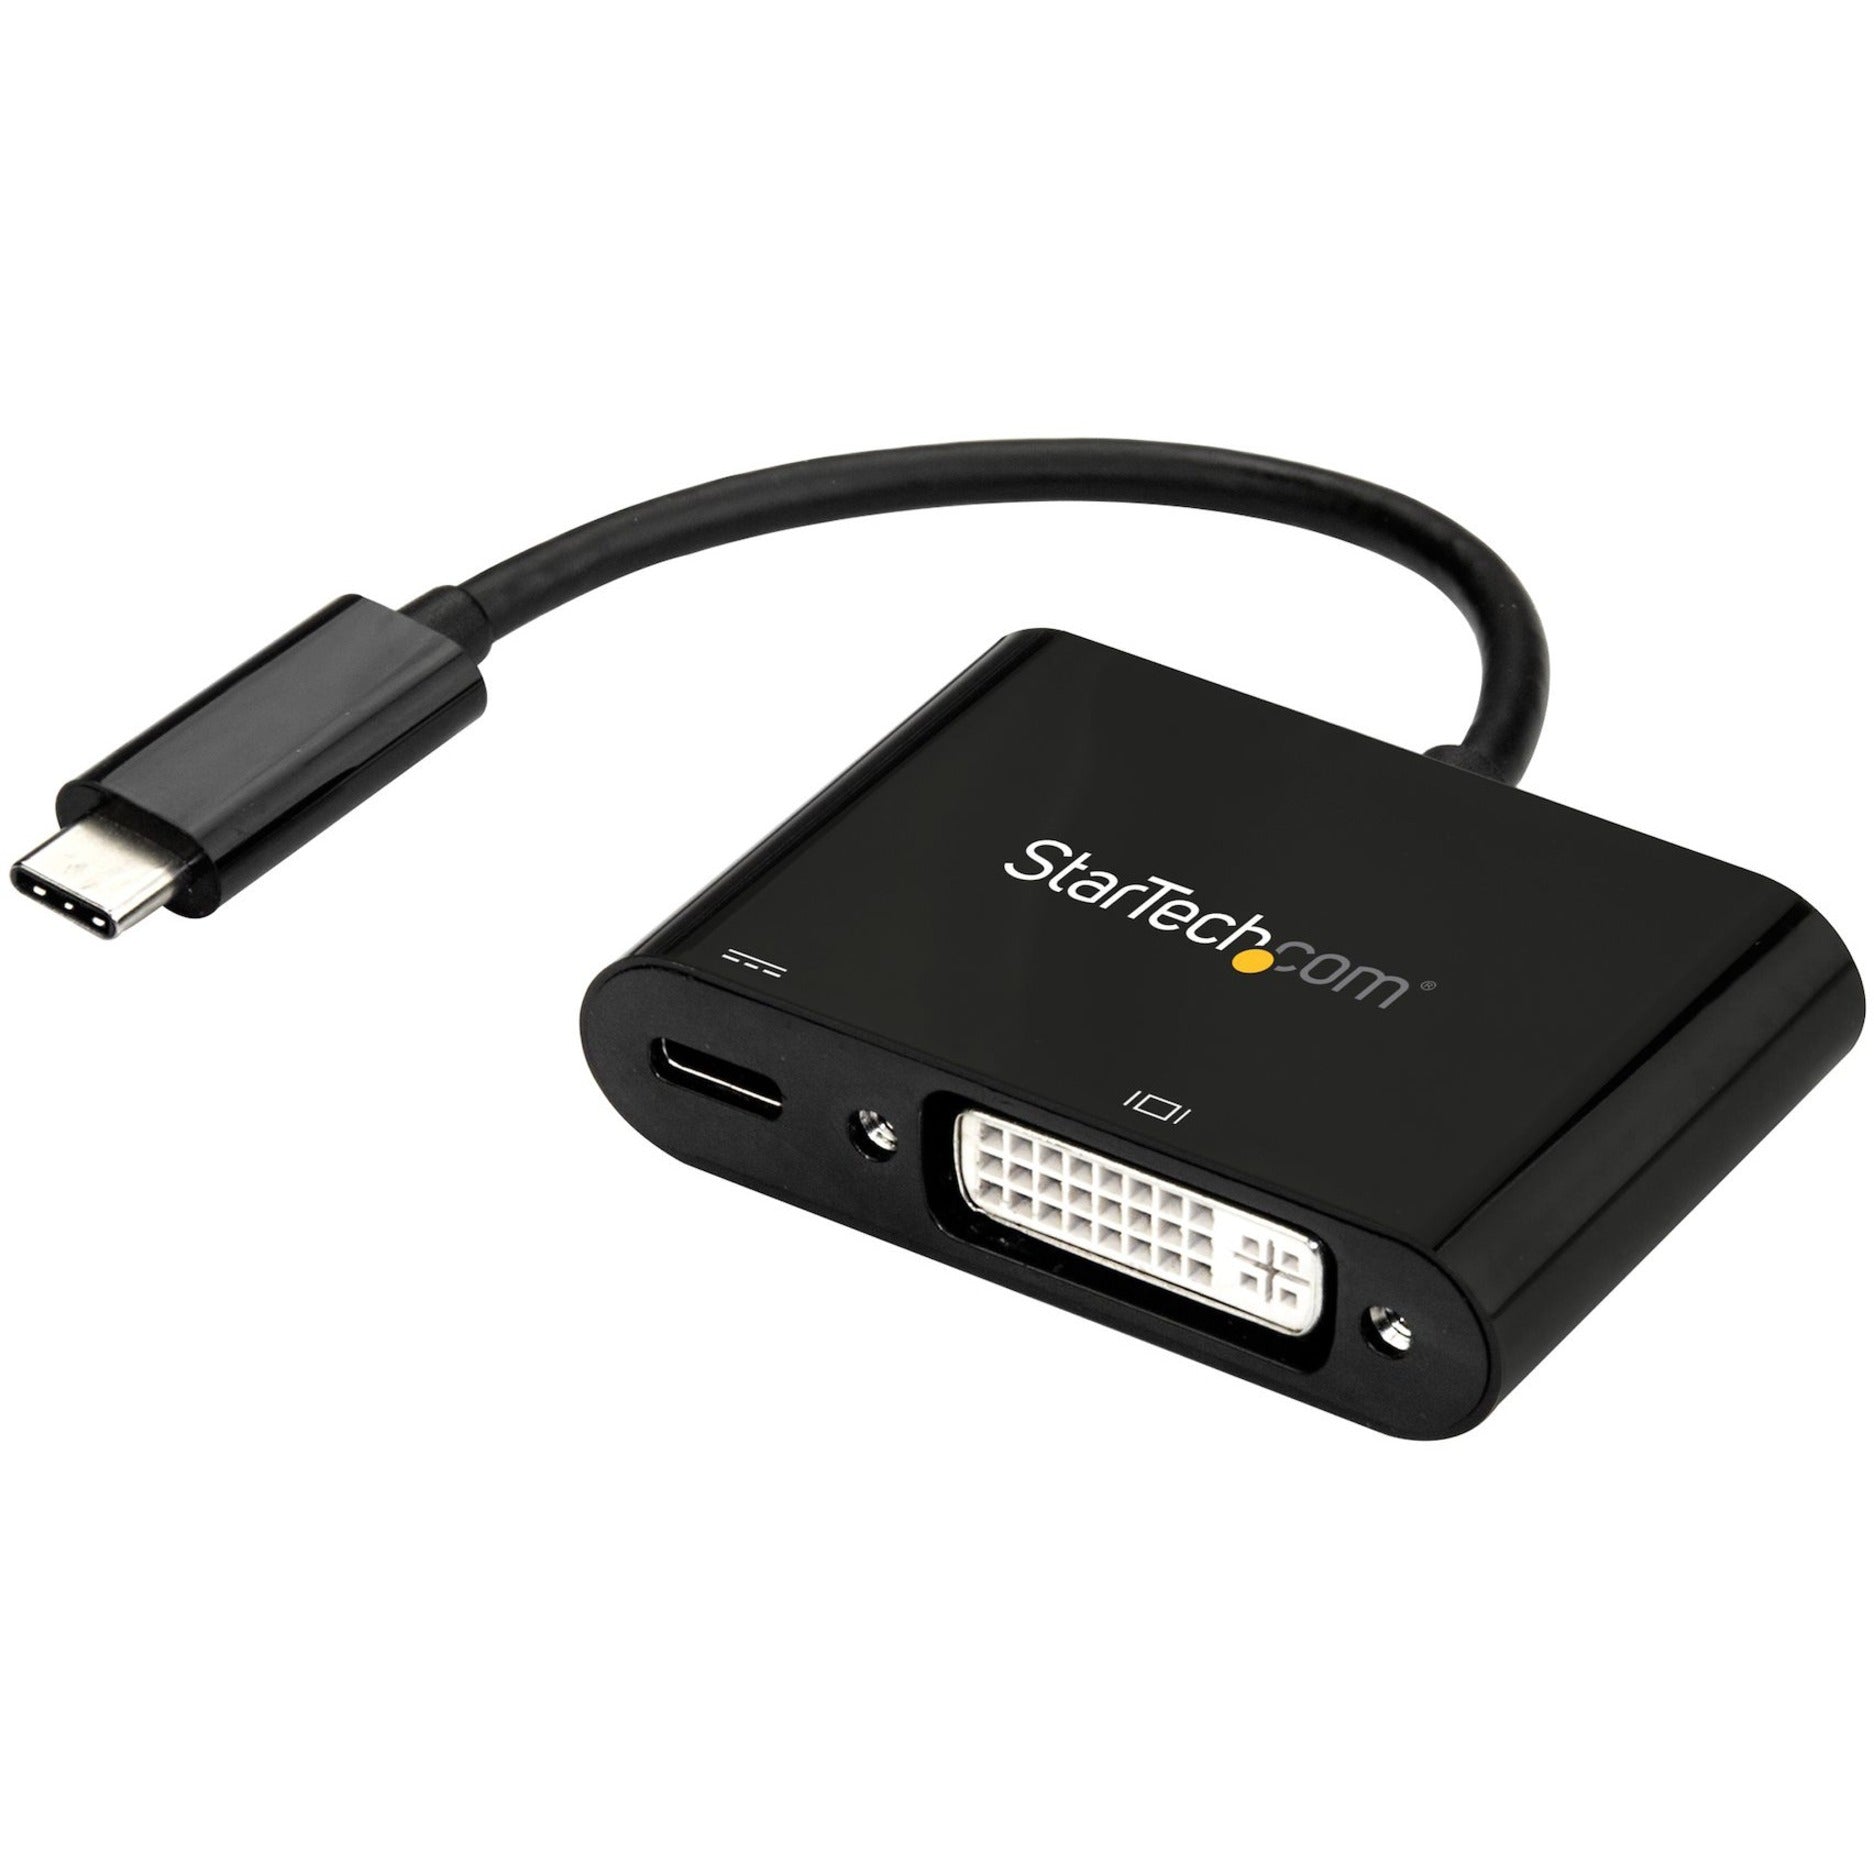 StarTech.com CDP2DVIUCP USB-C to DVI Adapter with Power Delivery - USB Type C Adapter - 1920 x 1200 - Black, Reversible